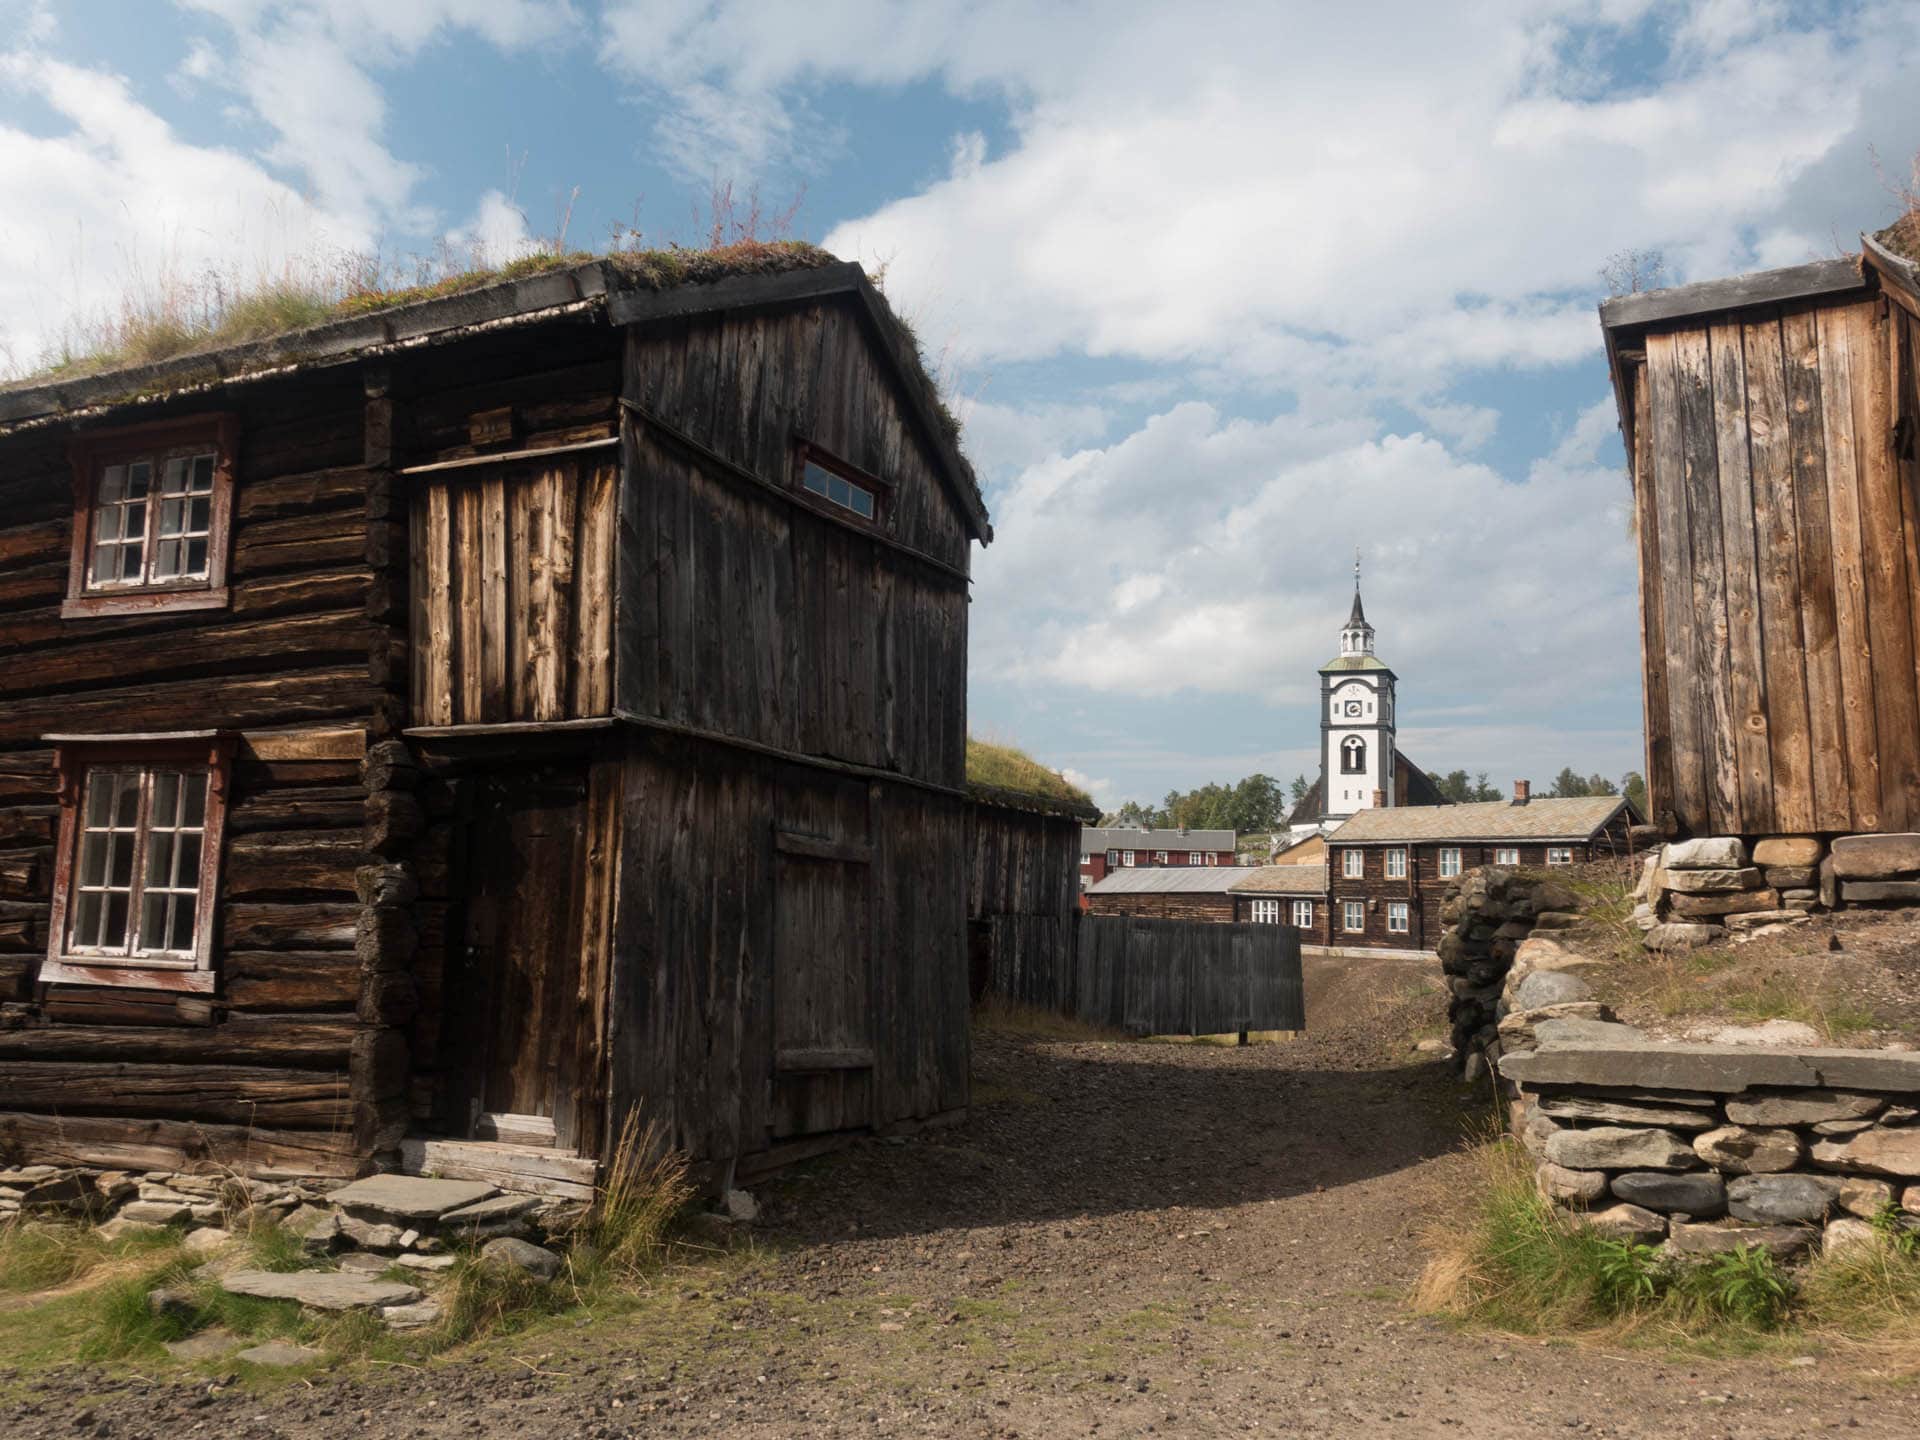 Røros, one of only eight UNESCO sites in Norway